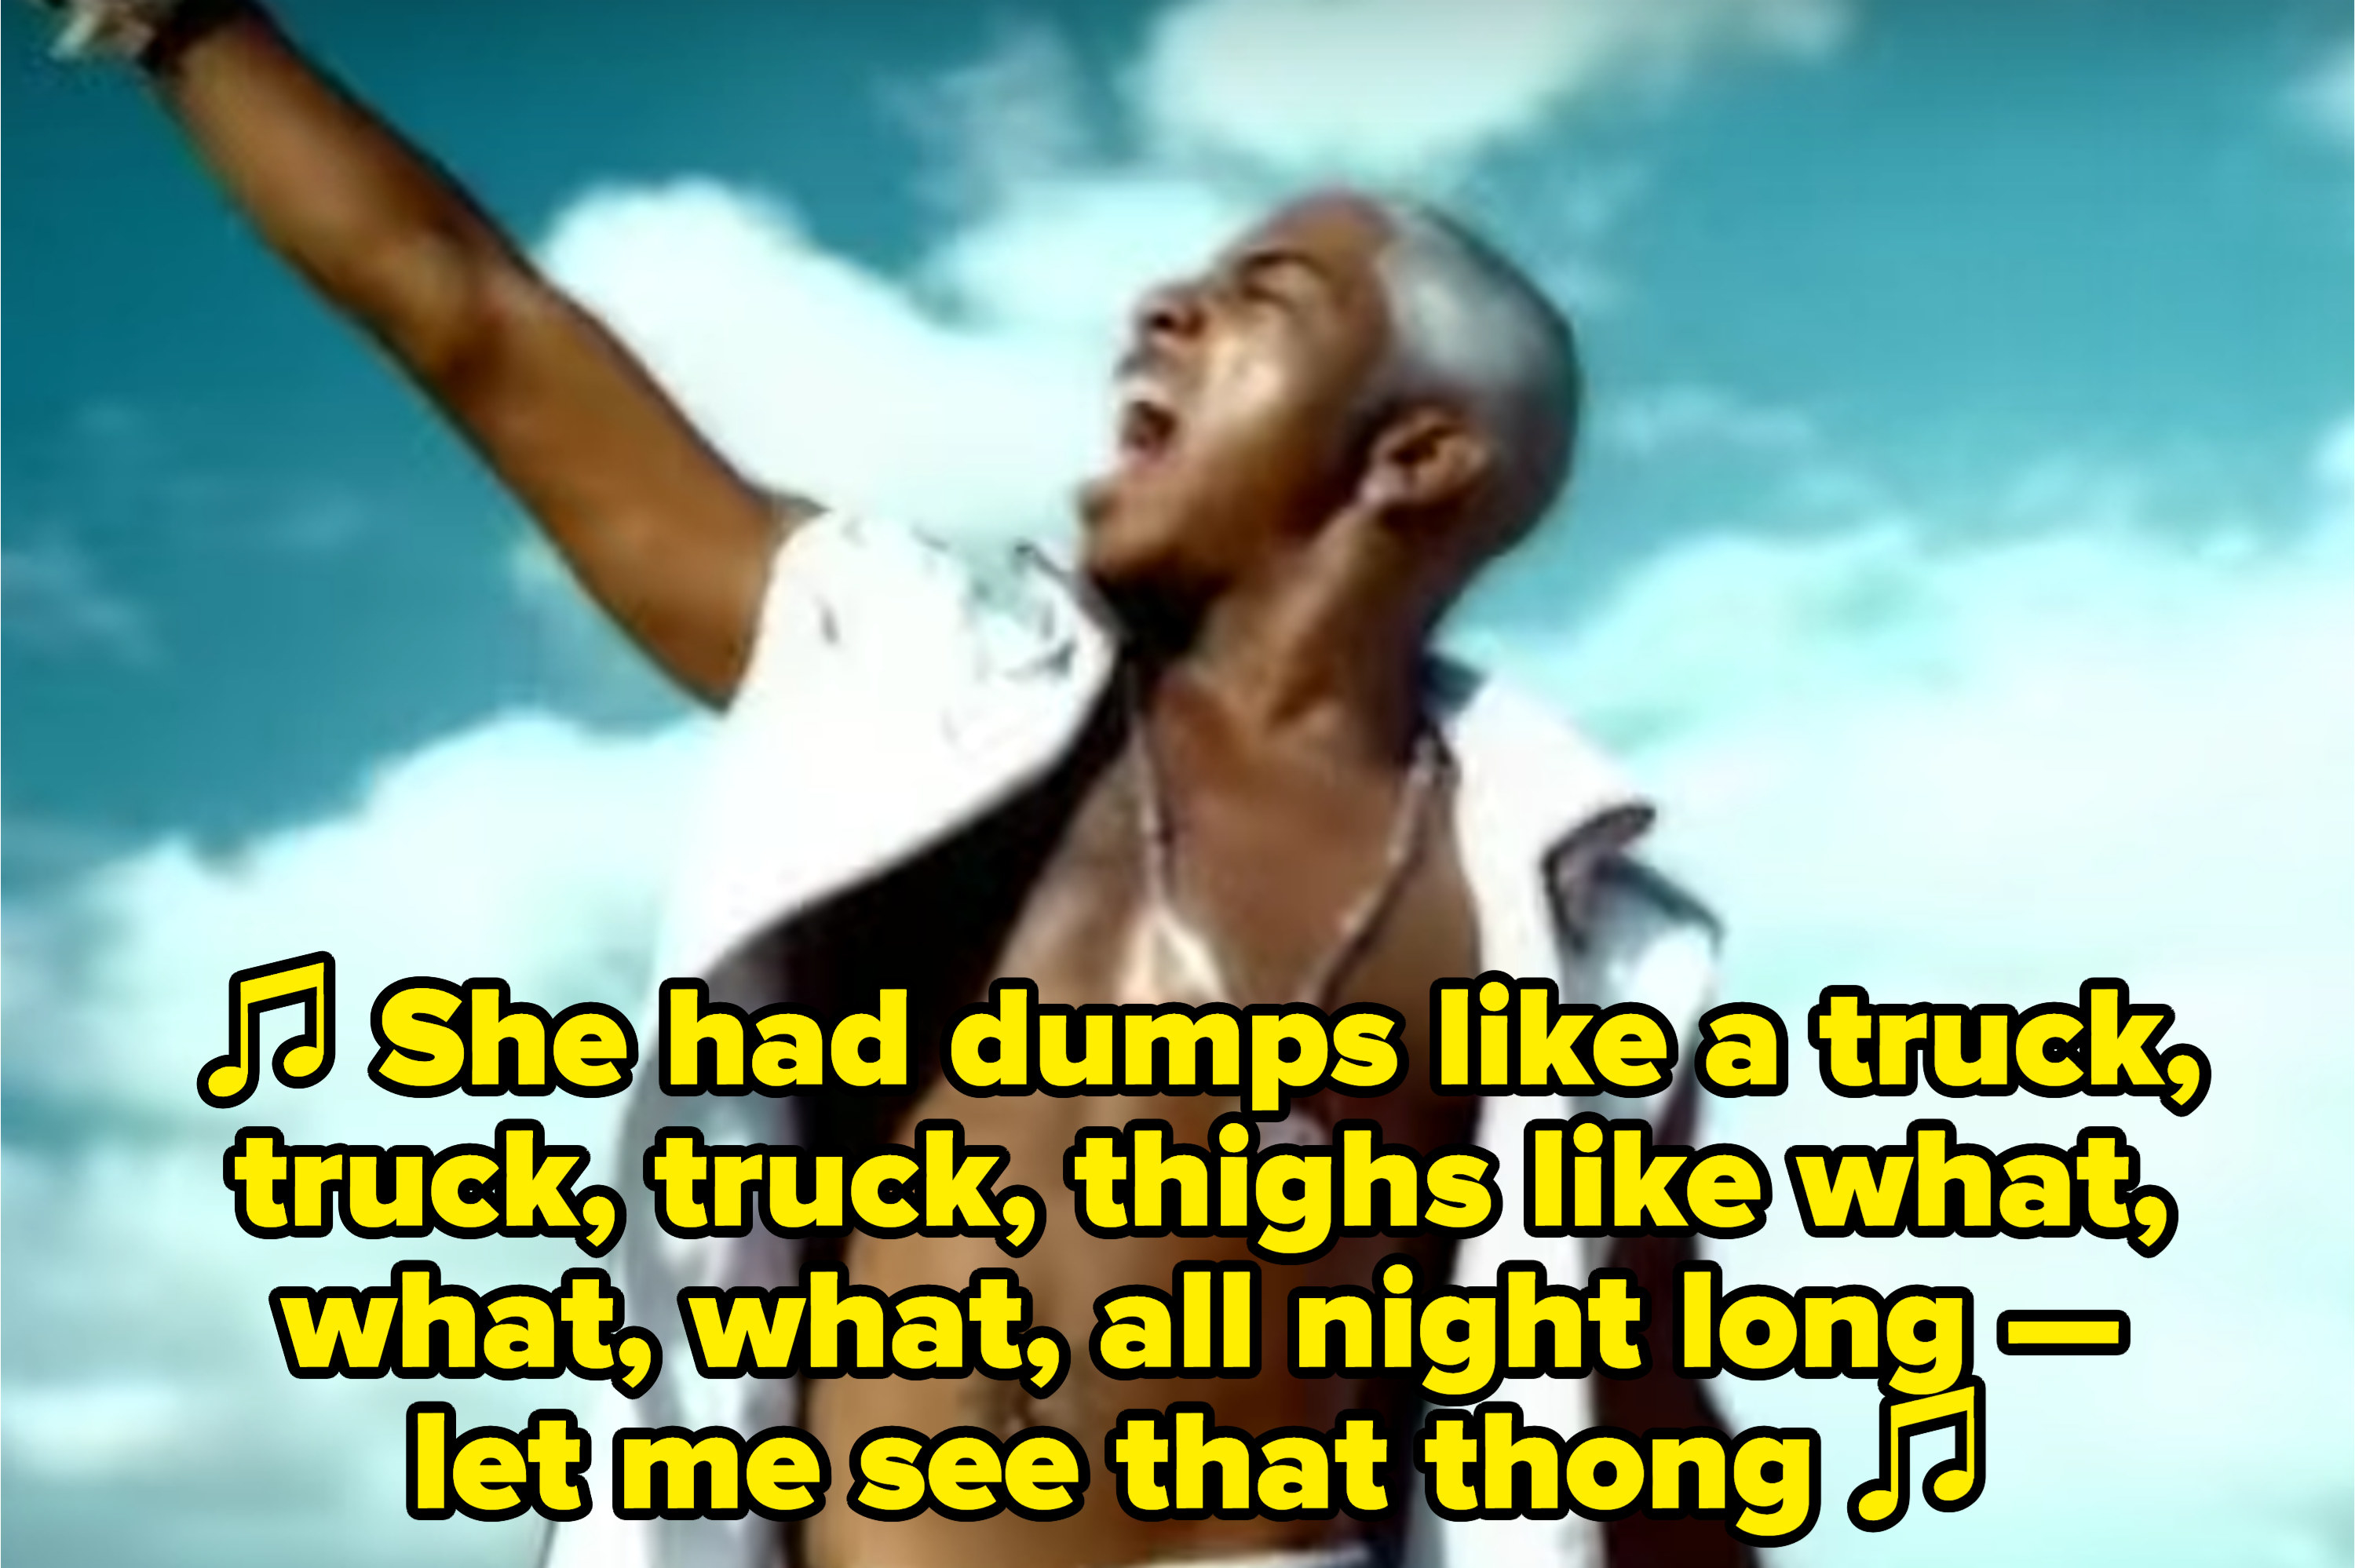 Sisqó singing: &quot;She had dumps like a truck, truck, truck, thighs like what, what, what, all night long — let me see that thong&quot;